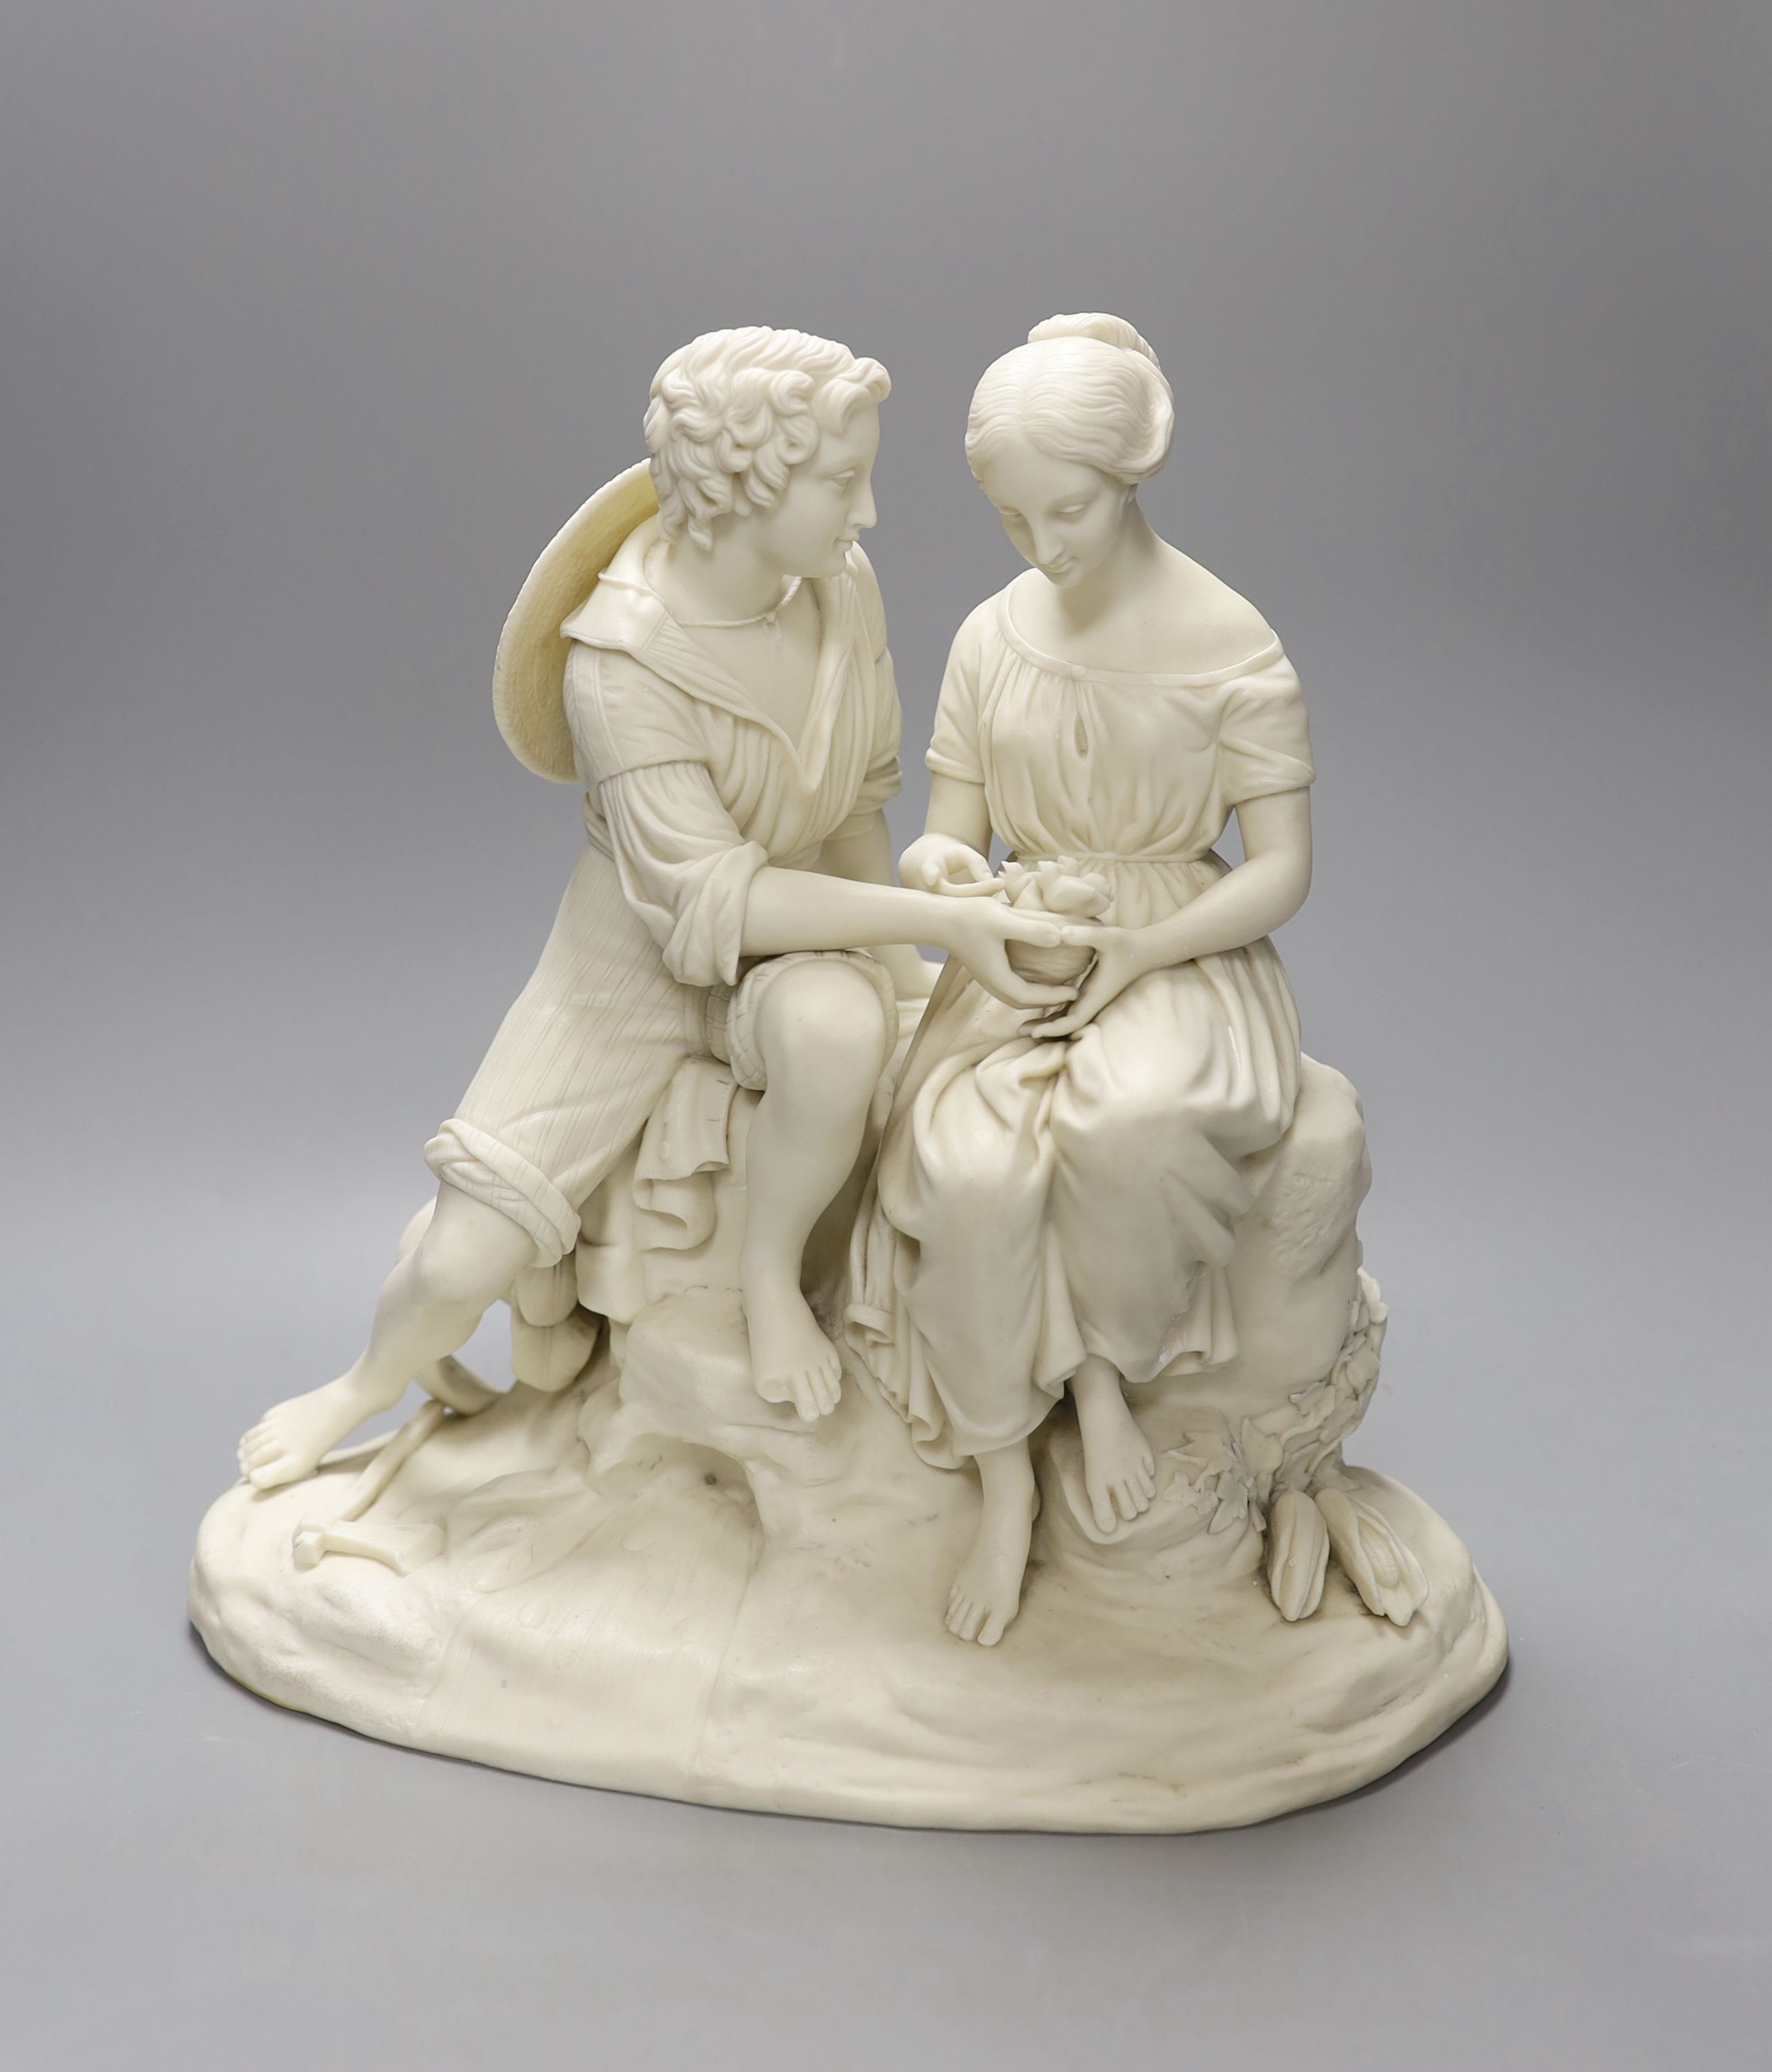 A Copeland parian group of Paul and Virginia after a model by C. Cumberworth, the couple seated with Paul offering a small bird's nest to Virginia, 29.5 cm high